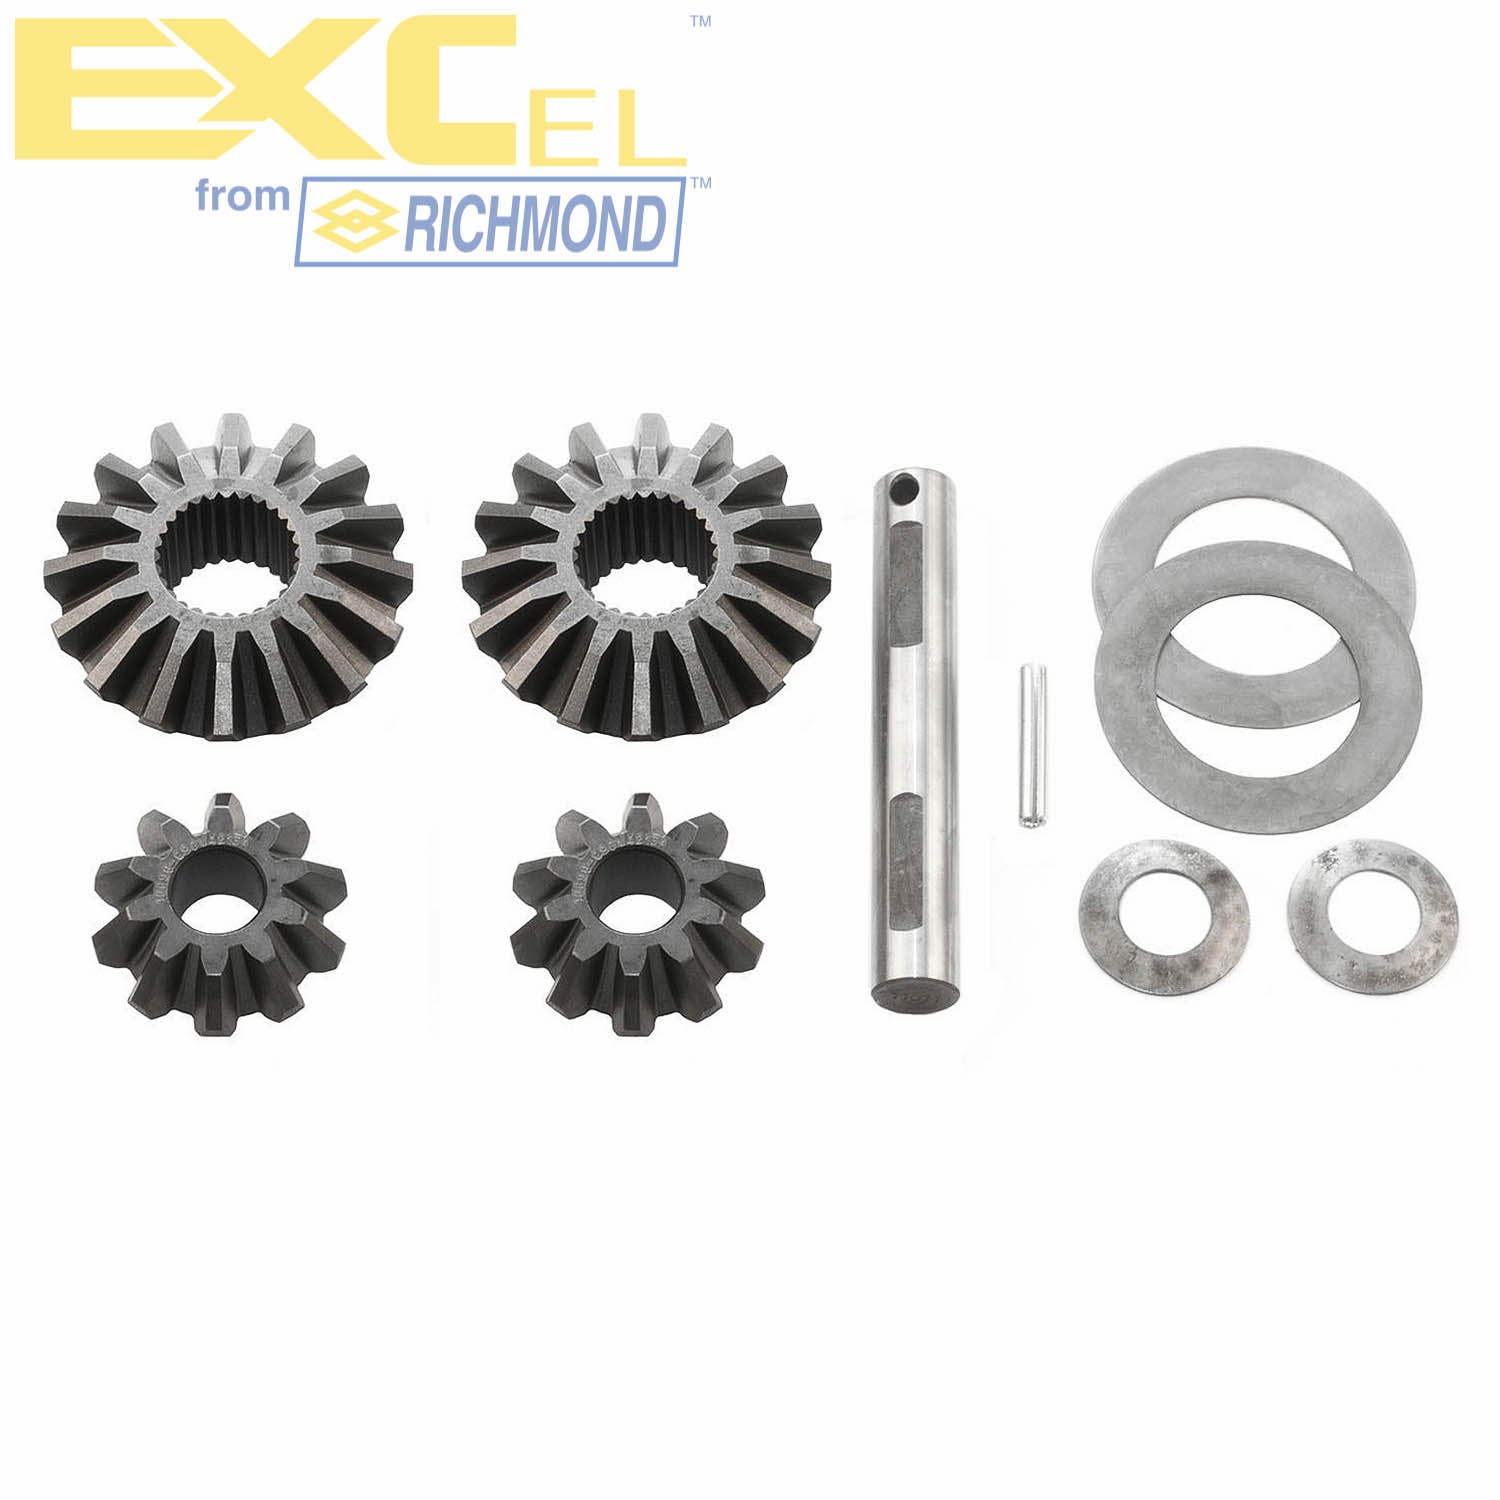 Excel XL-4022 Differential Carrier Gear Kit